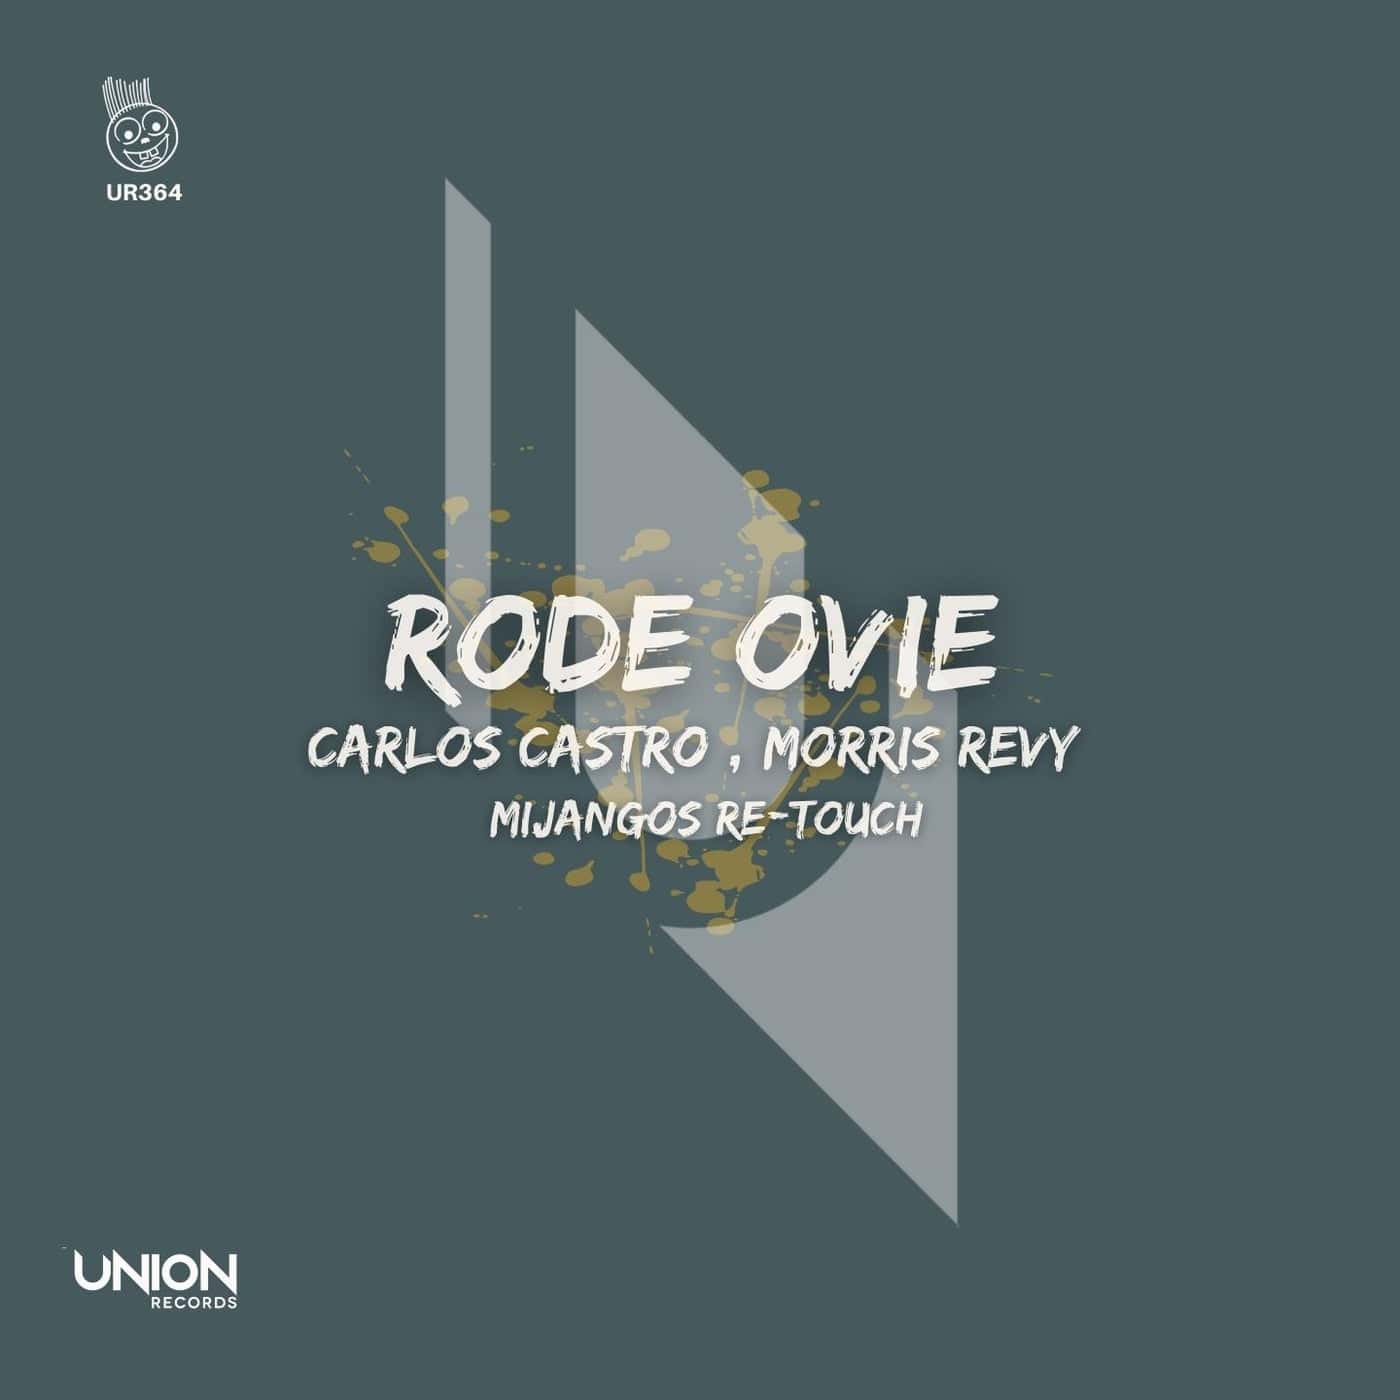 Download Morris Revy, Carlos Castro - Rode Ovie (Mijangos Re-Touch) on Electrobuzz